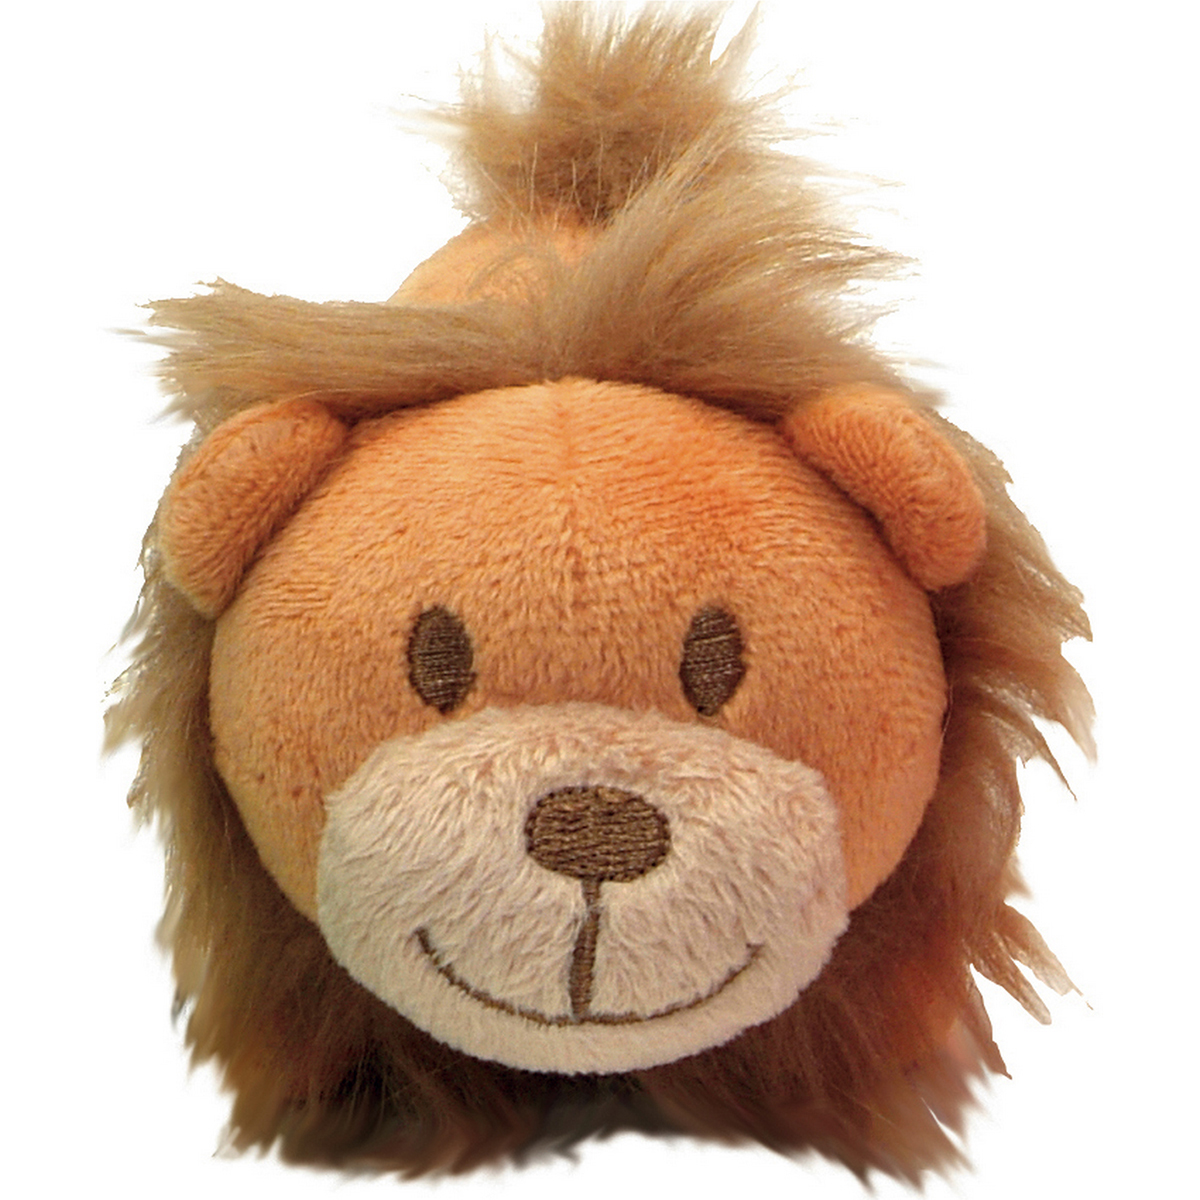 4.5 In. Lil Pals Plush Dog Toy - Lion, Brown